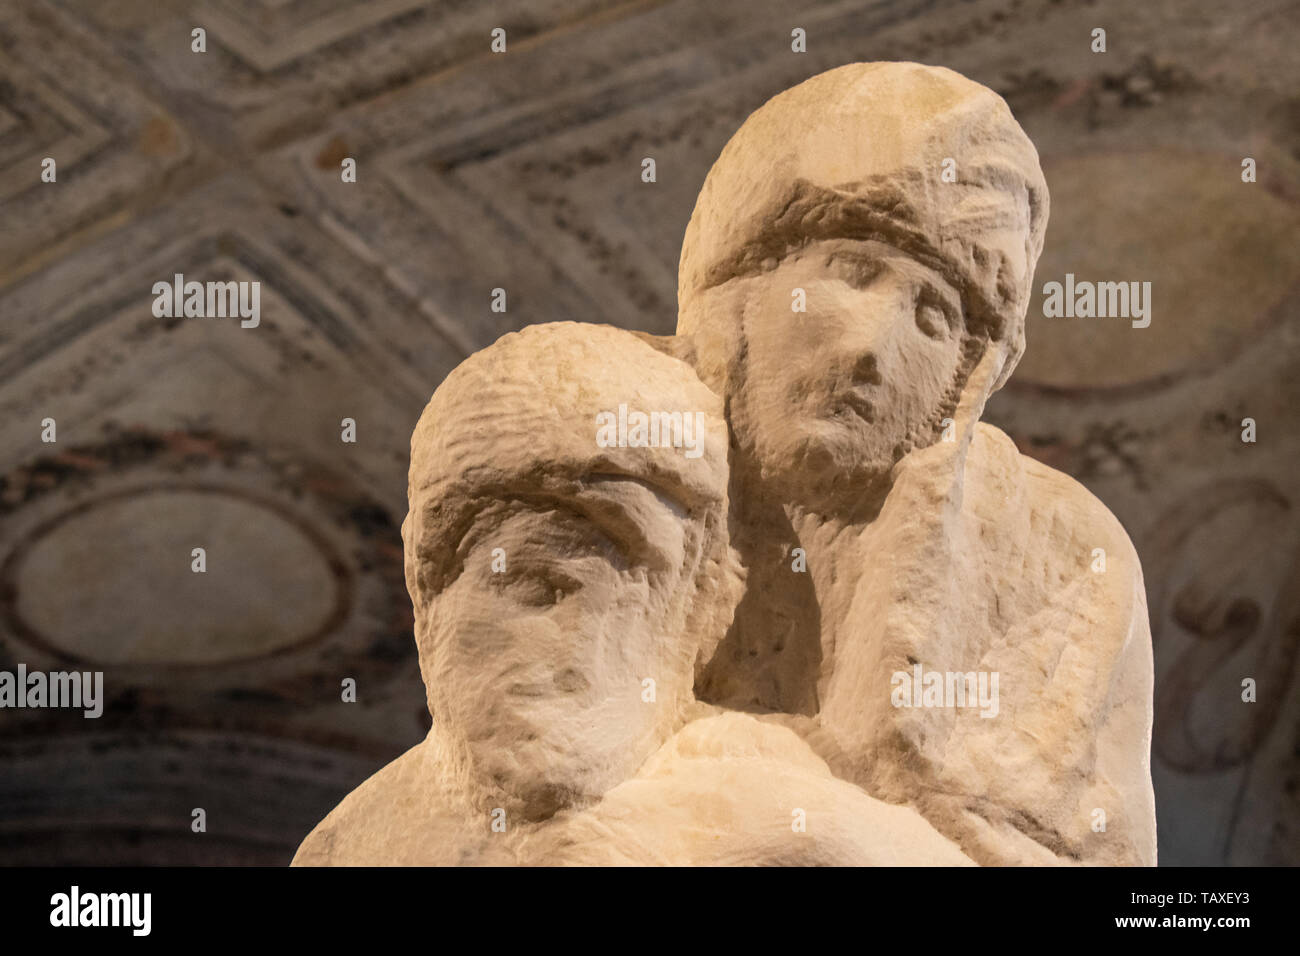 Sforza Castle, museum, Milan: details of The Rondanini Pietà, sculpture that Michelangelo Buonarroti worked on from 1552 until his death in 1564 Stock Photo